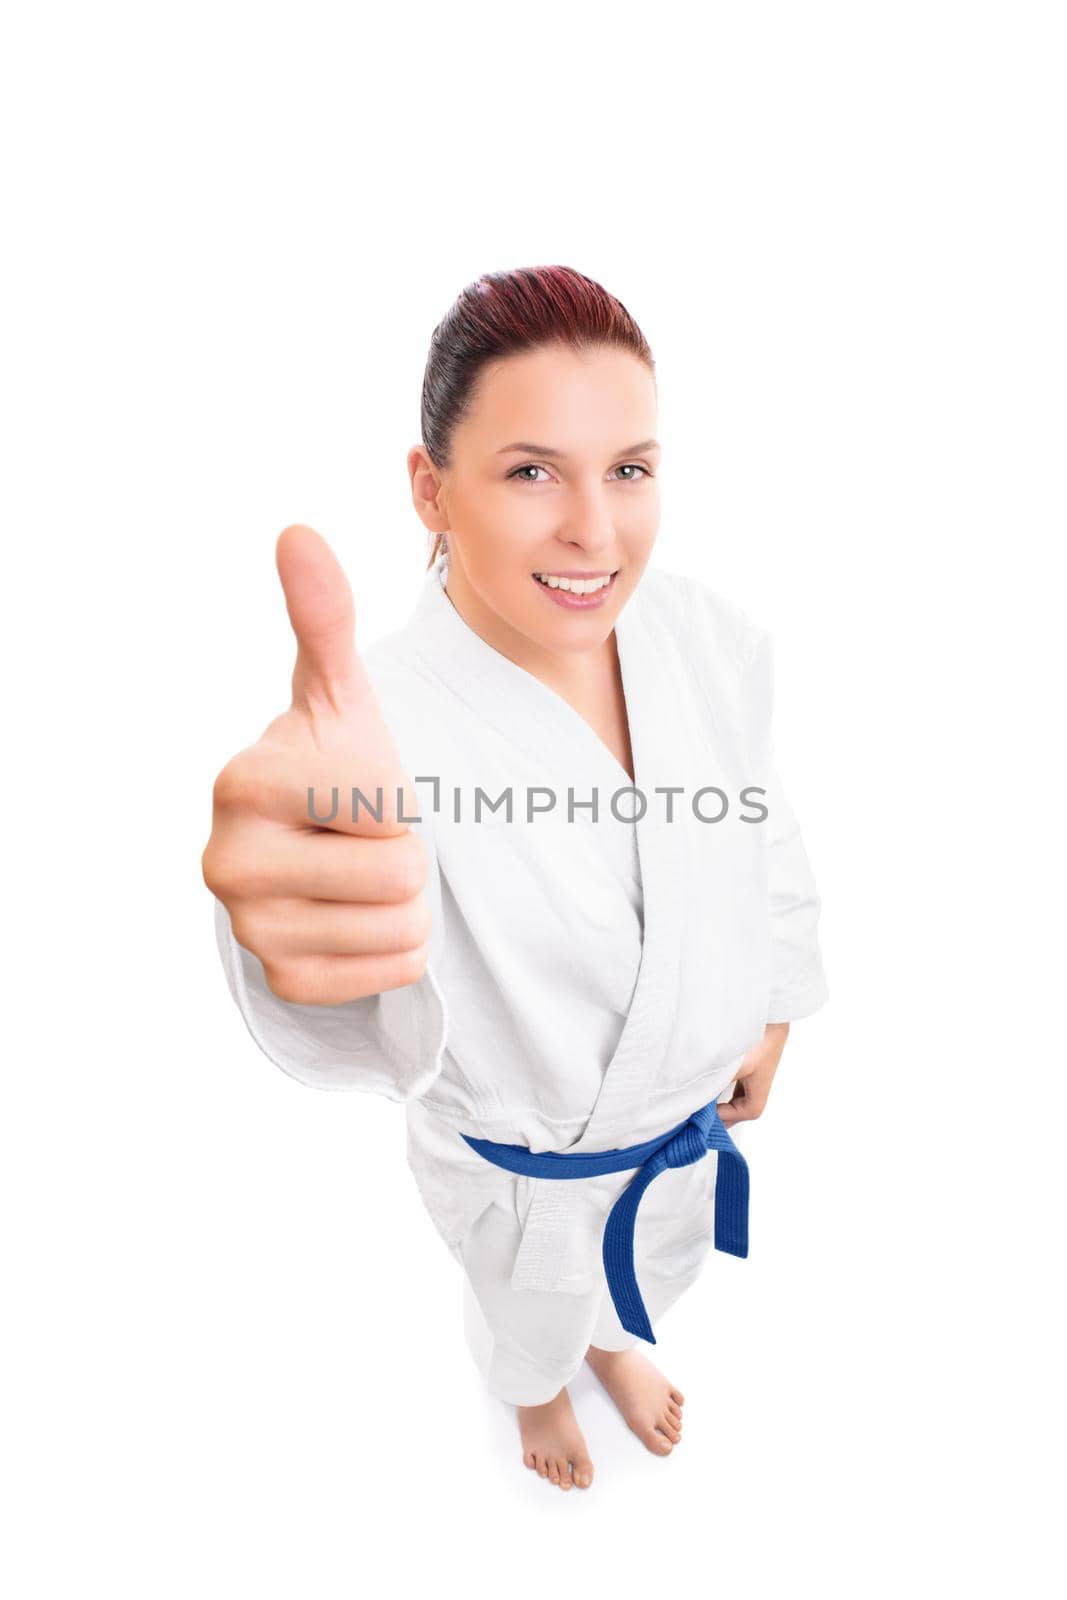 Top-down full body portrait of a beautiful smiling young female fighter in white kimono and blue belt showing thumb up gesture, isolated on white background. Martial arts concept.